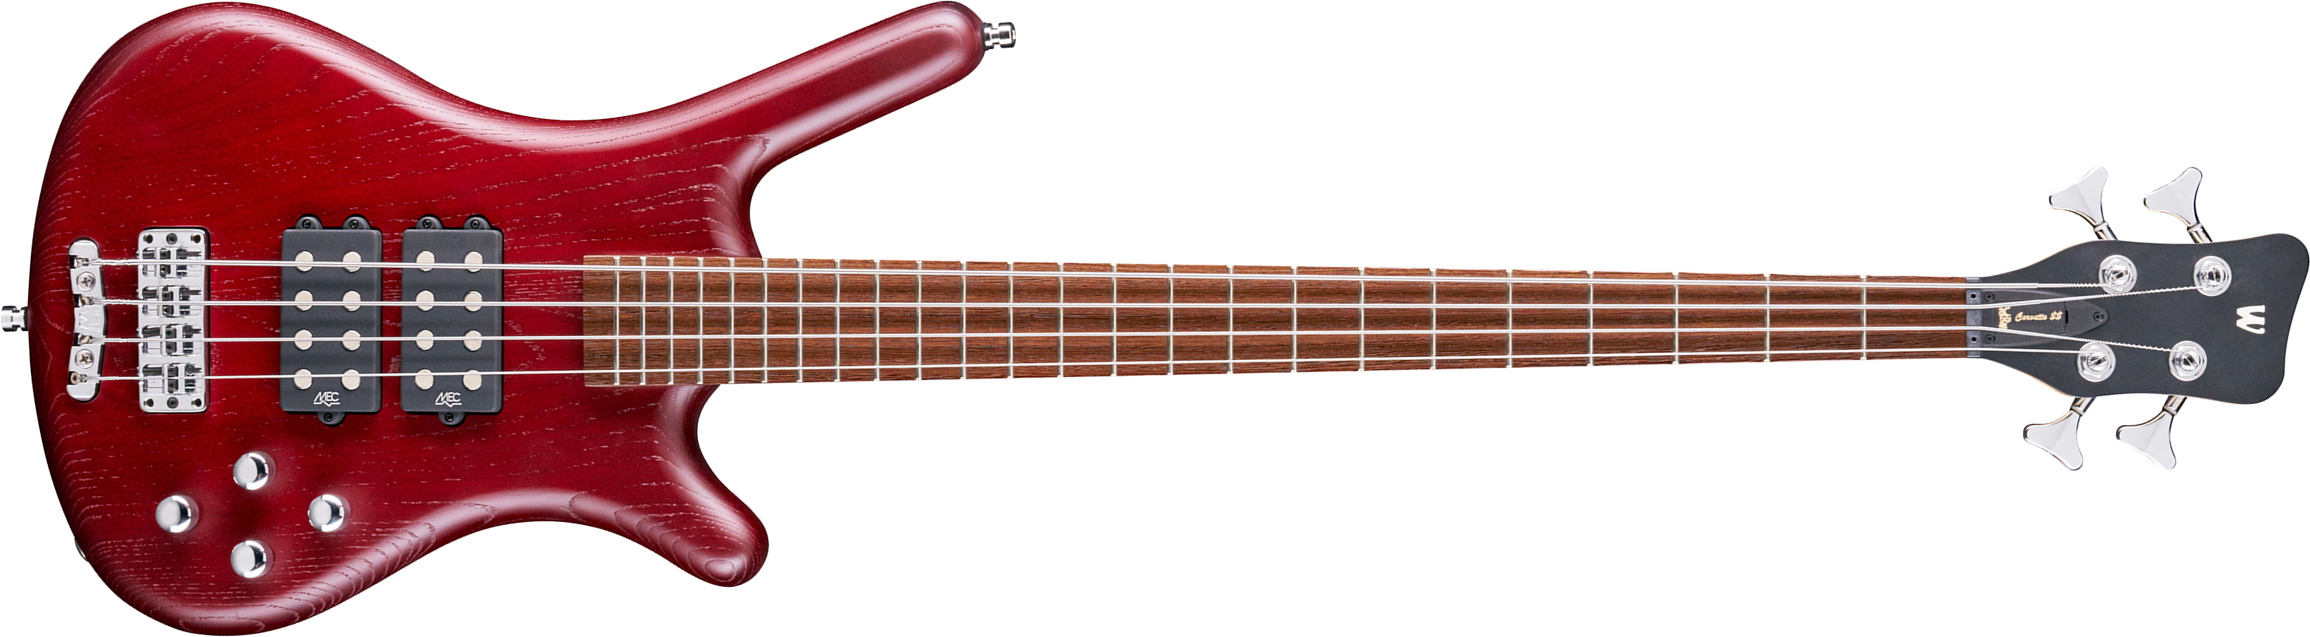 Warwick Corvette $$ 4c Rockbass Active Wen - Burgundy Red Satin - Solid body electric bass - Main picture